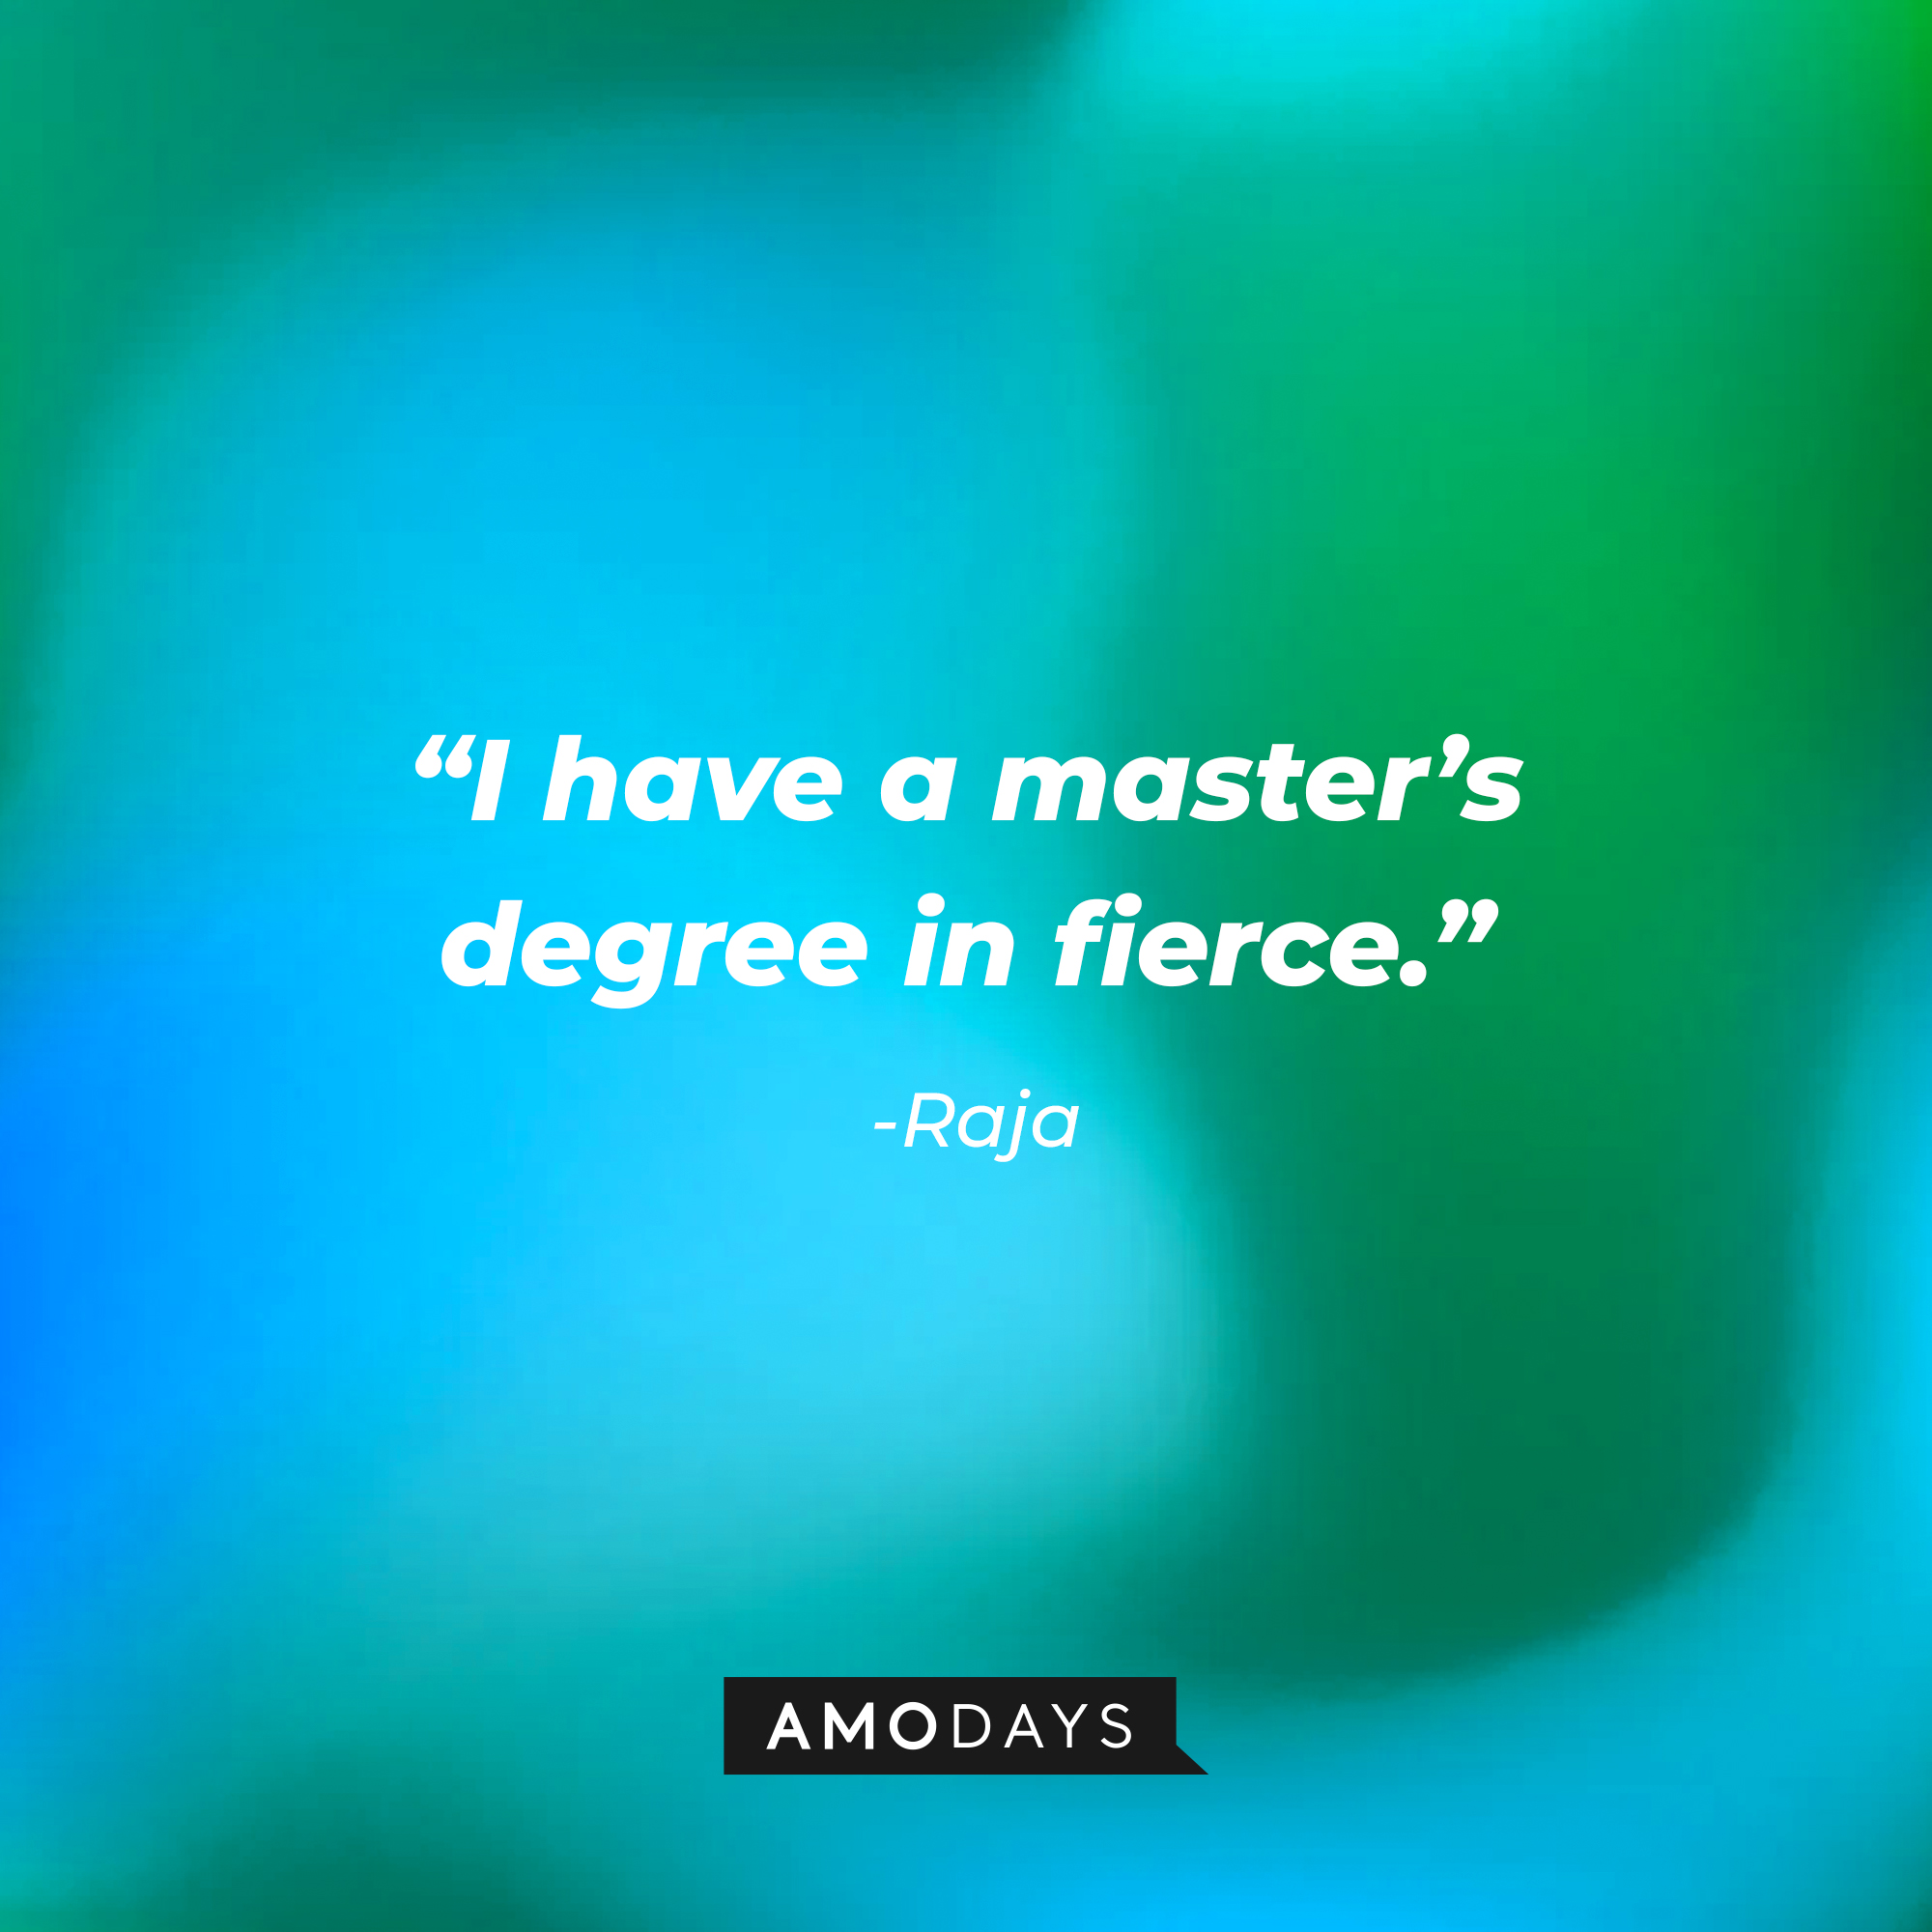 Raja’s quote: “I have a master’s degree in fierce.” |  Source: AmoDays